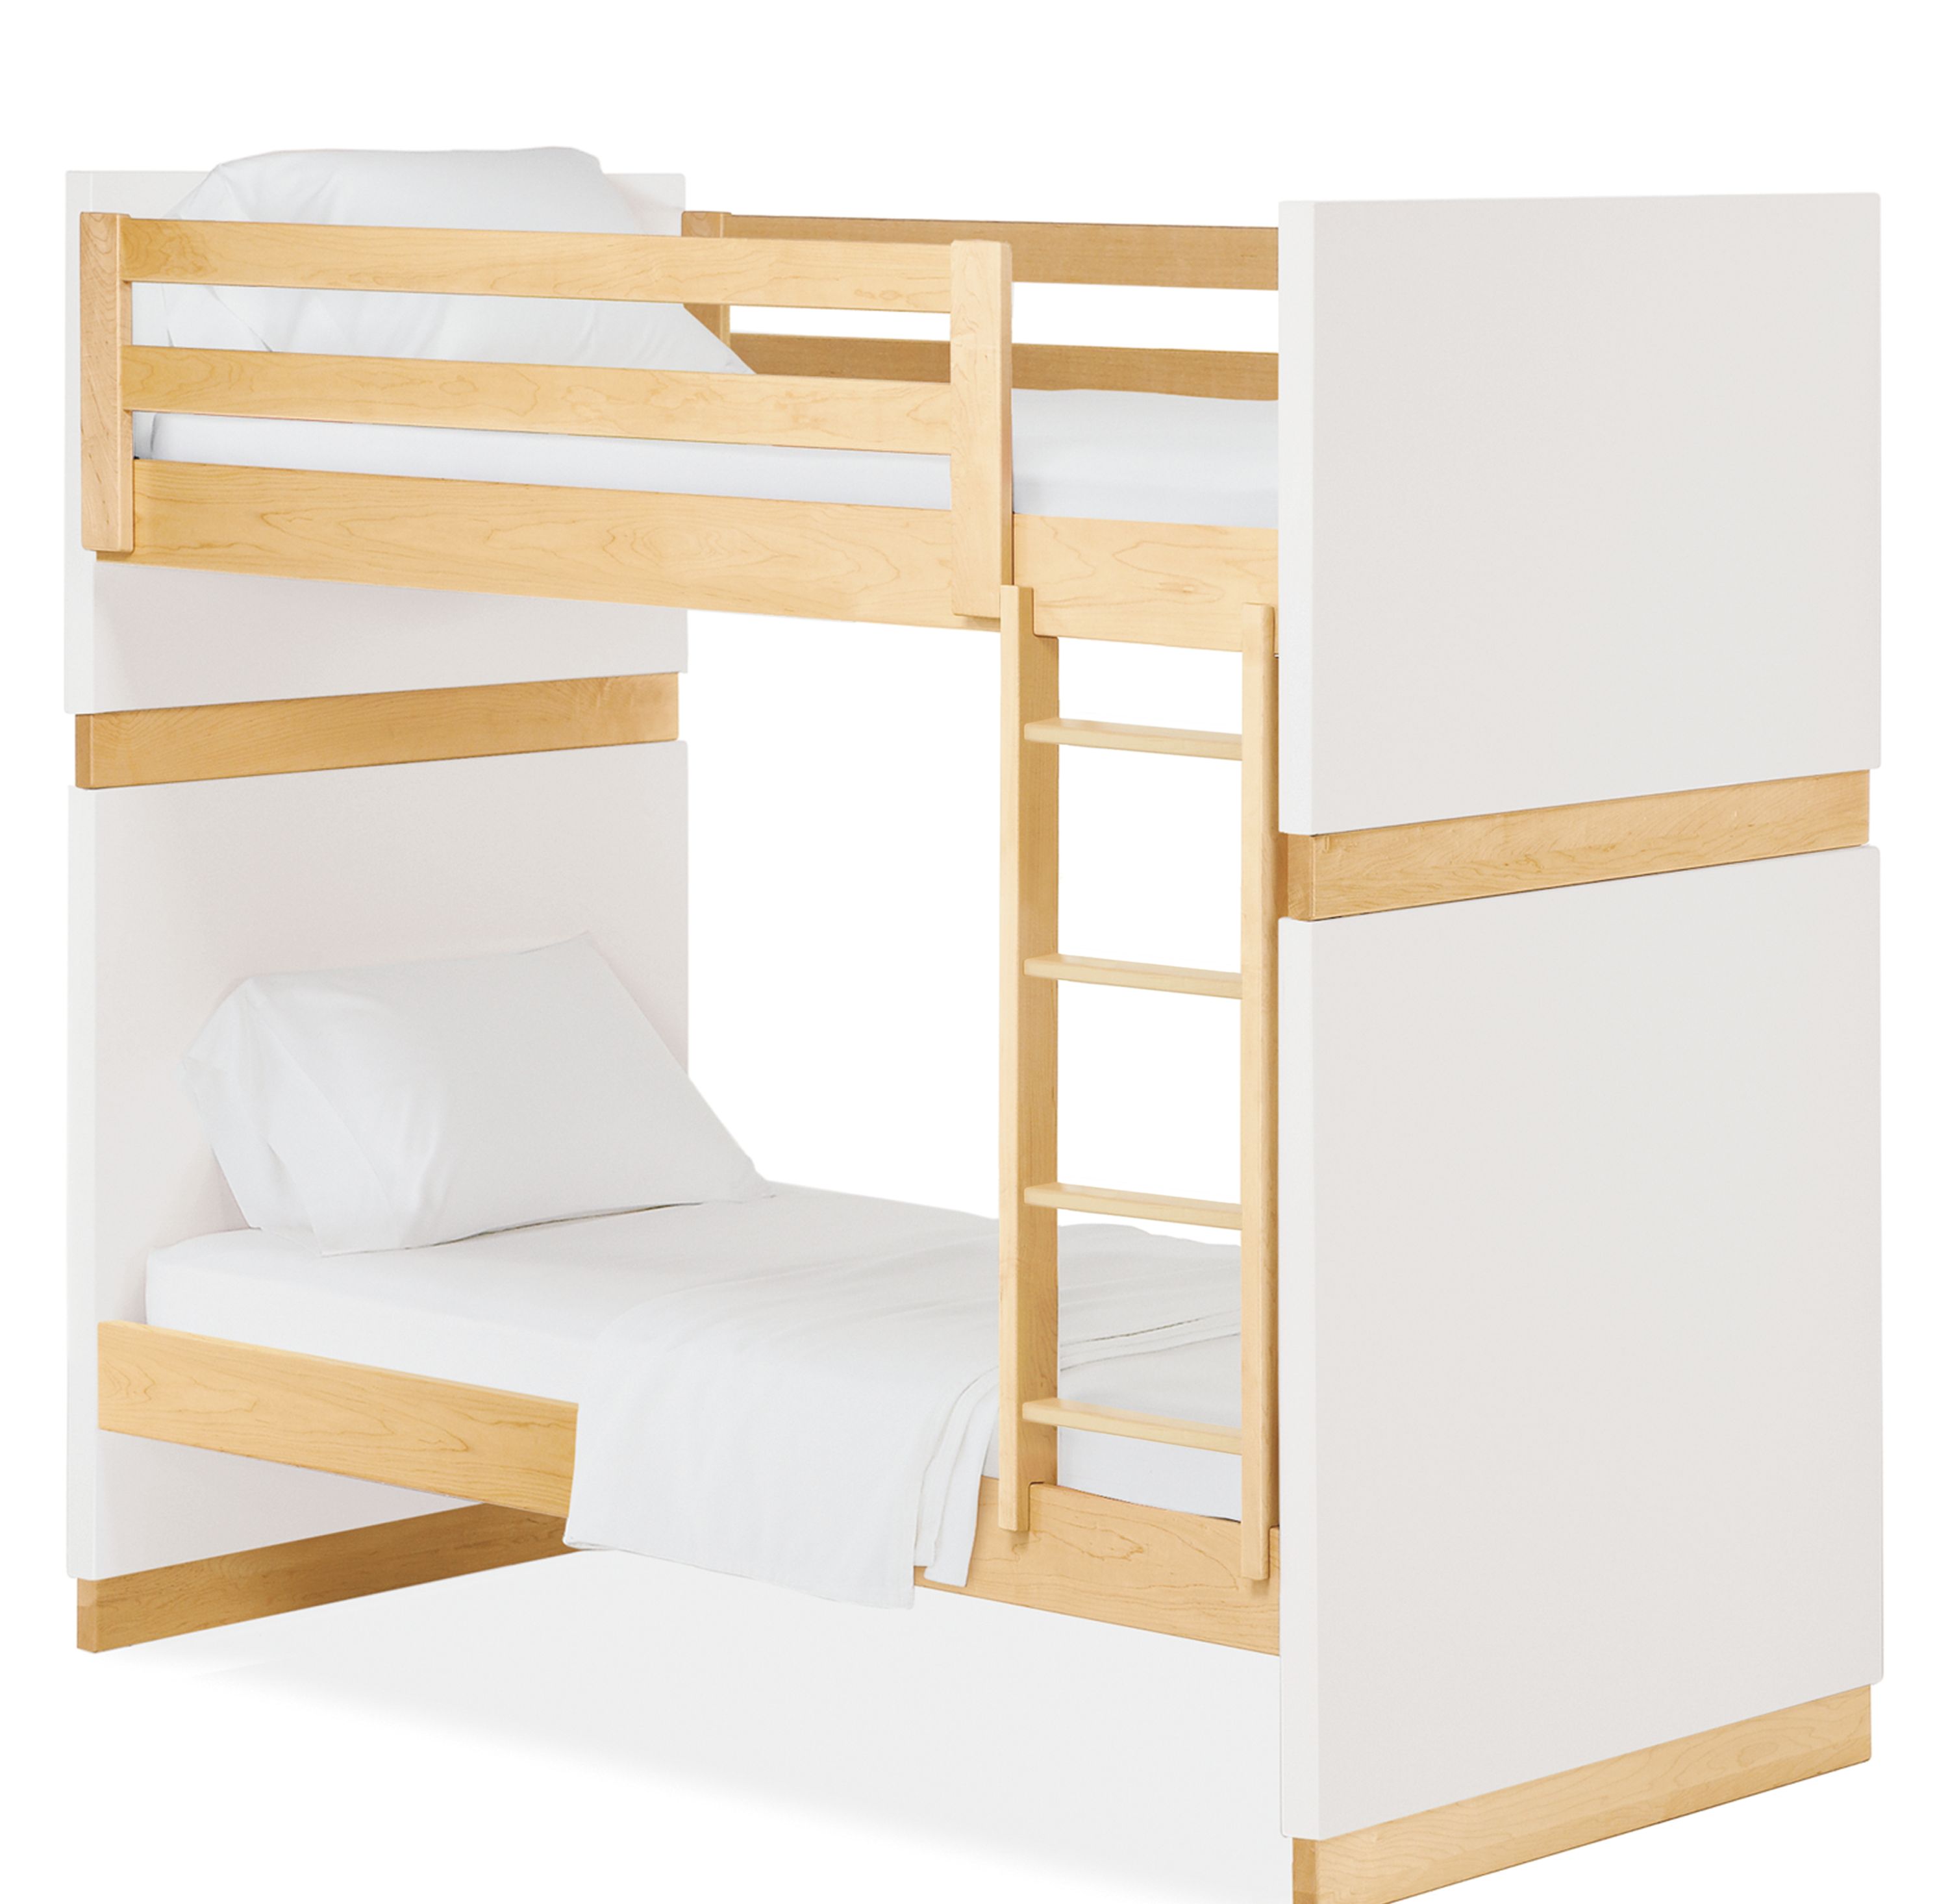 Moda Bunk Beds Twin Over, Solid Maple Wood Bunk Beds